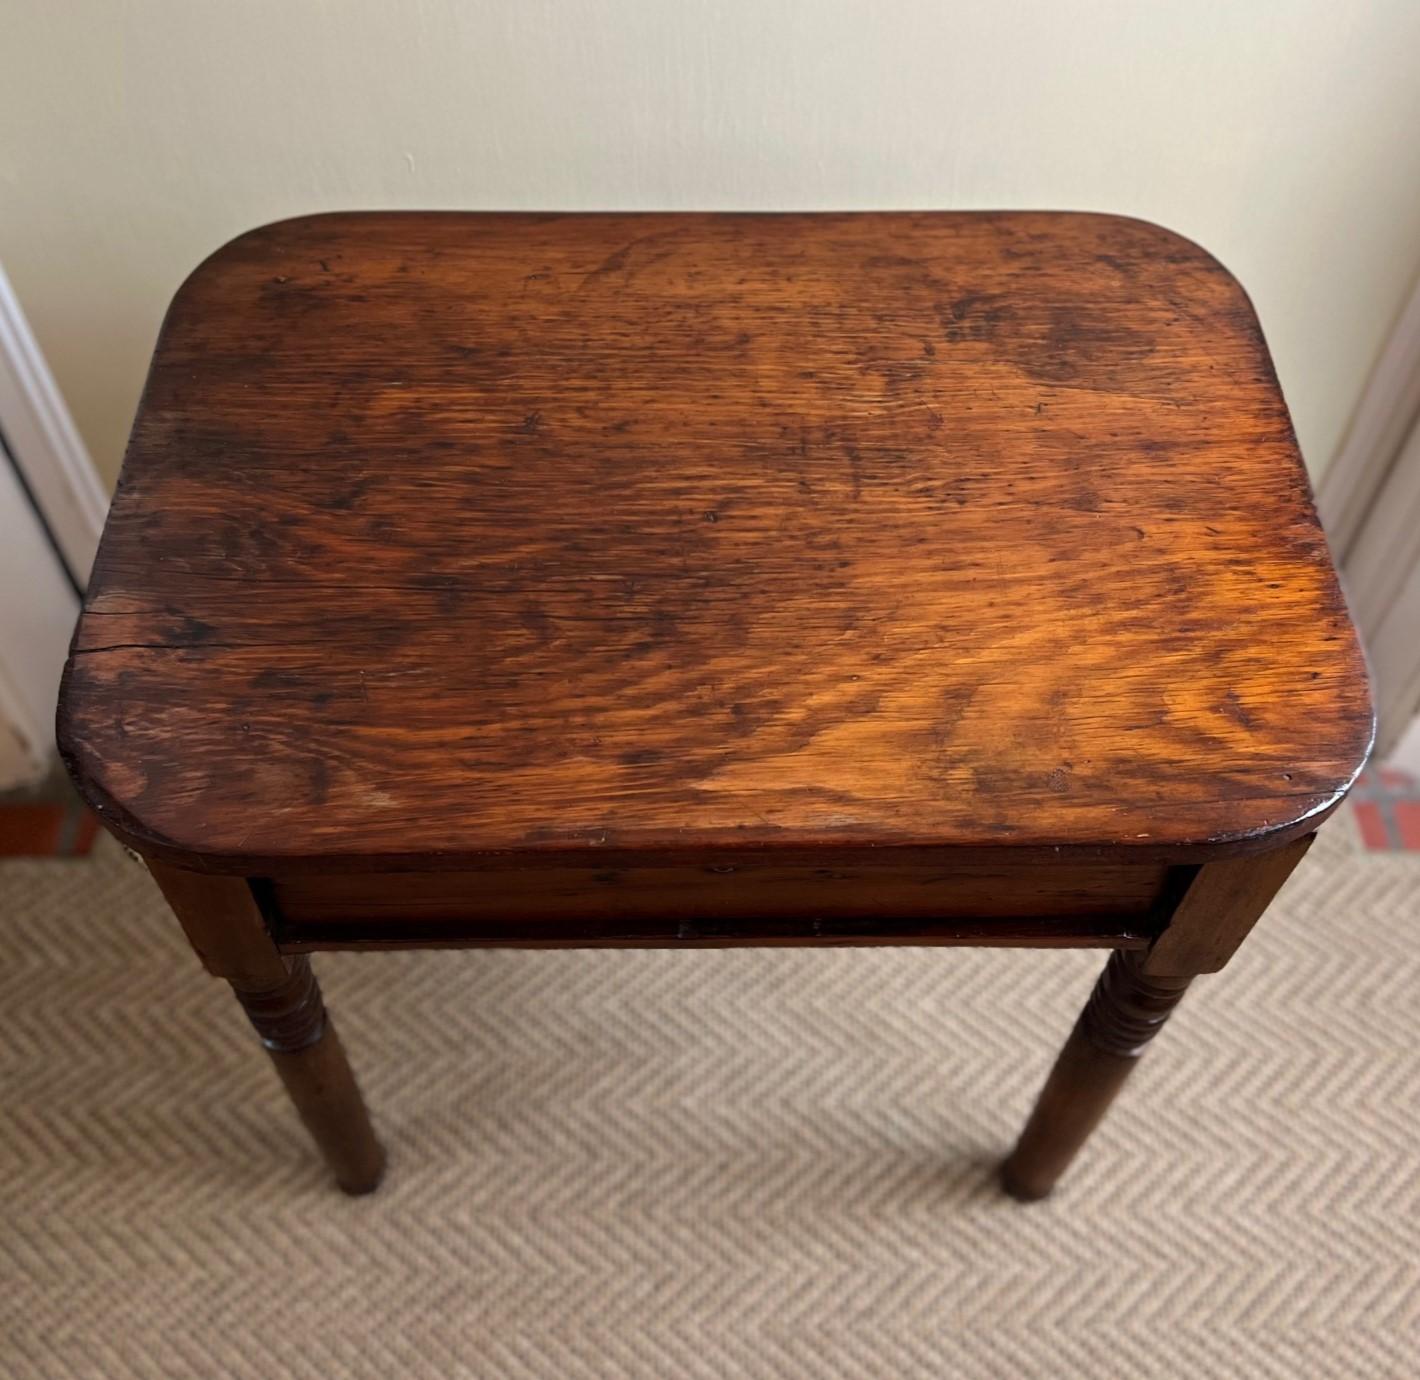 Likely early 20th C., a sweet, rustic and honest side table with lockable drawer (key not retained). The table top is made of a single slab of wood with rounded corners on turned bobbin legs. The table shows evidence of use and care over many years